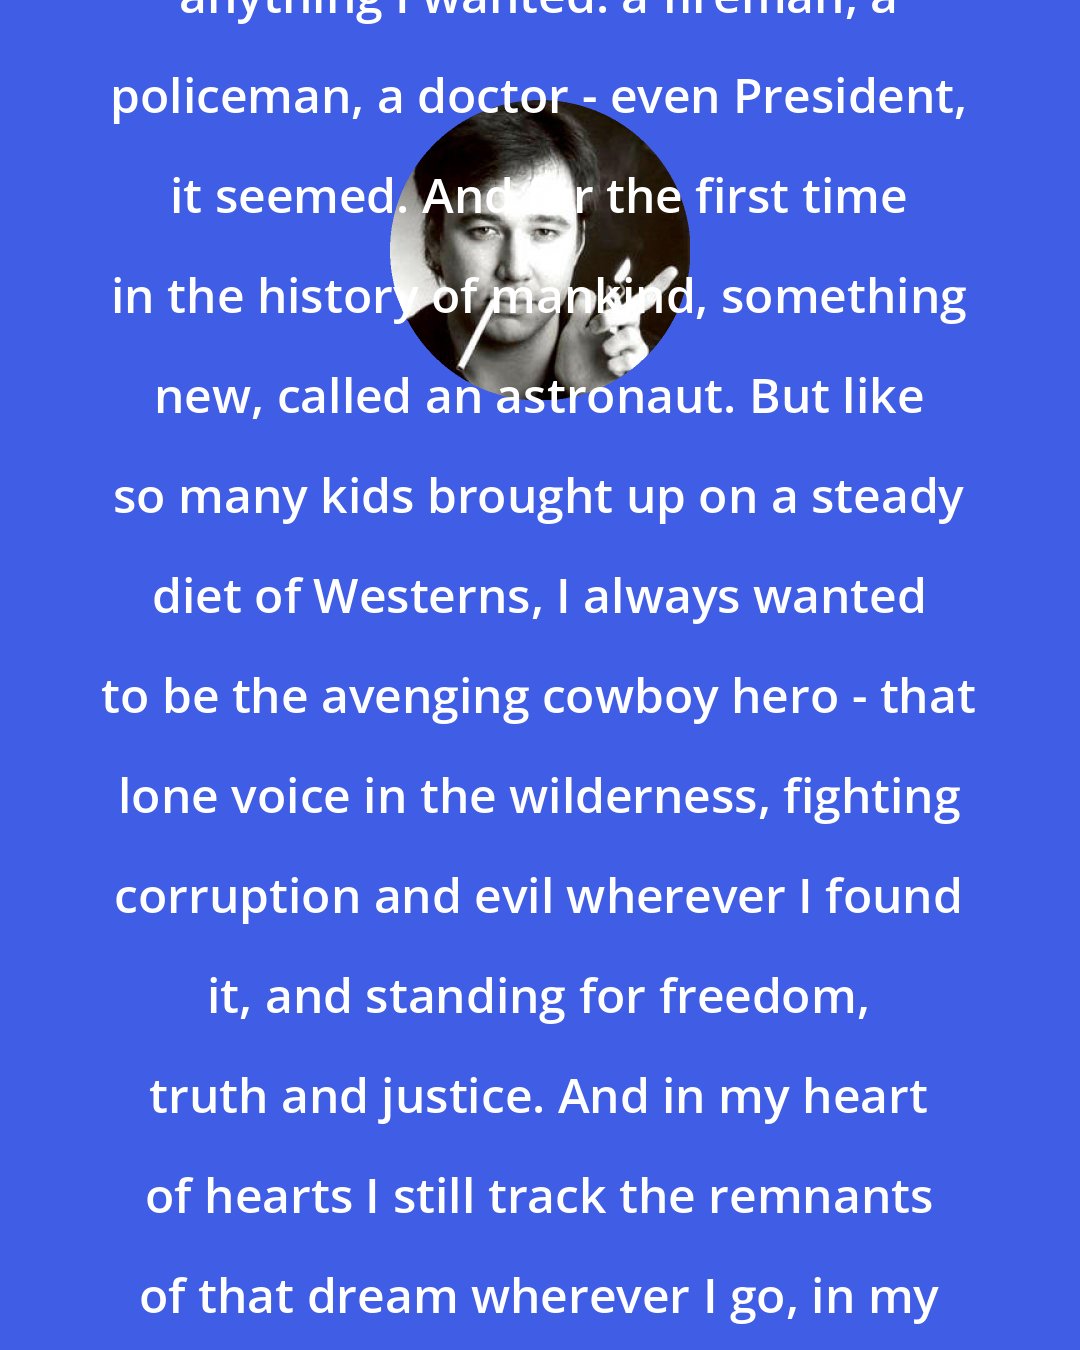 Bill Hicks: I was told when I grew up I could be anything I wanted: a fireman, a policeman, a doctor - even President, it seemed. And for the first time in the history of mankind, something new, called an astronaut. But like so many kids brought up on a steady diet of Westerns, I always wanted to be the avenging cowboy hero - that lone voice in the wilderness, fighting corruption and evil wherever I found it, and standing for freedom, truth and justice. And in my heart of hearts I still track the remnants of that dream wherever I go, in my endless ride into the setting sun.